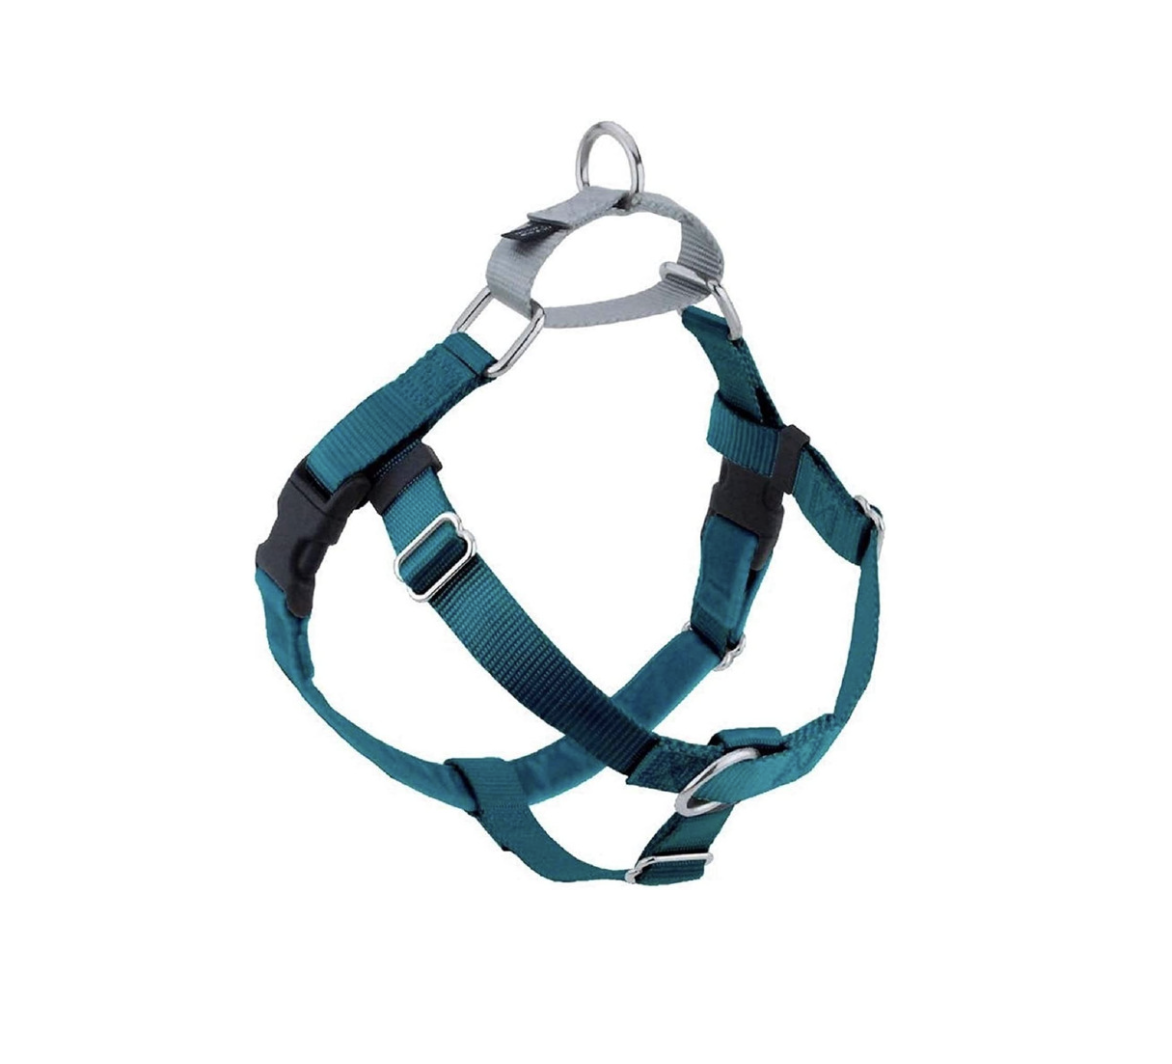 Mighty Paw Car Dog Harness Vehicle Safety Harness with Adjustable Straps and Soft Padding Doubles as a Standard Harness with a No Pull Front Leash Attachment 